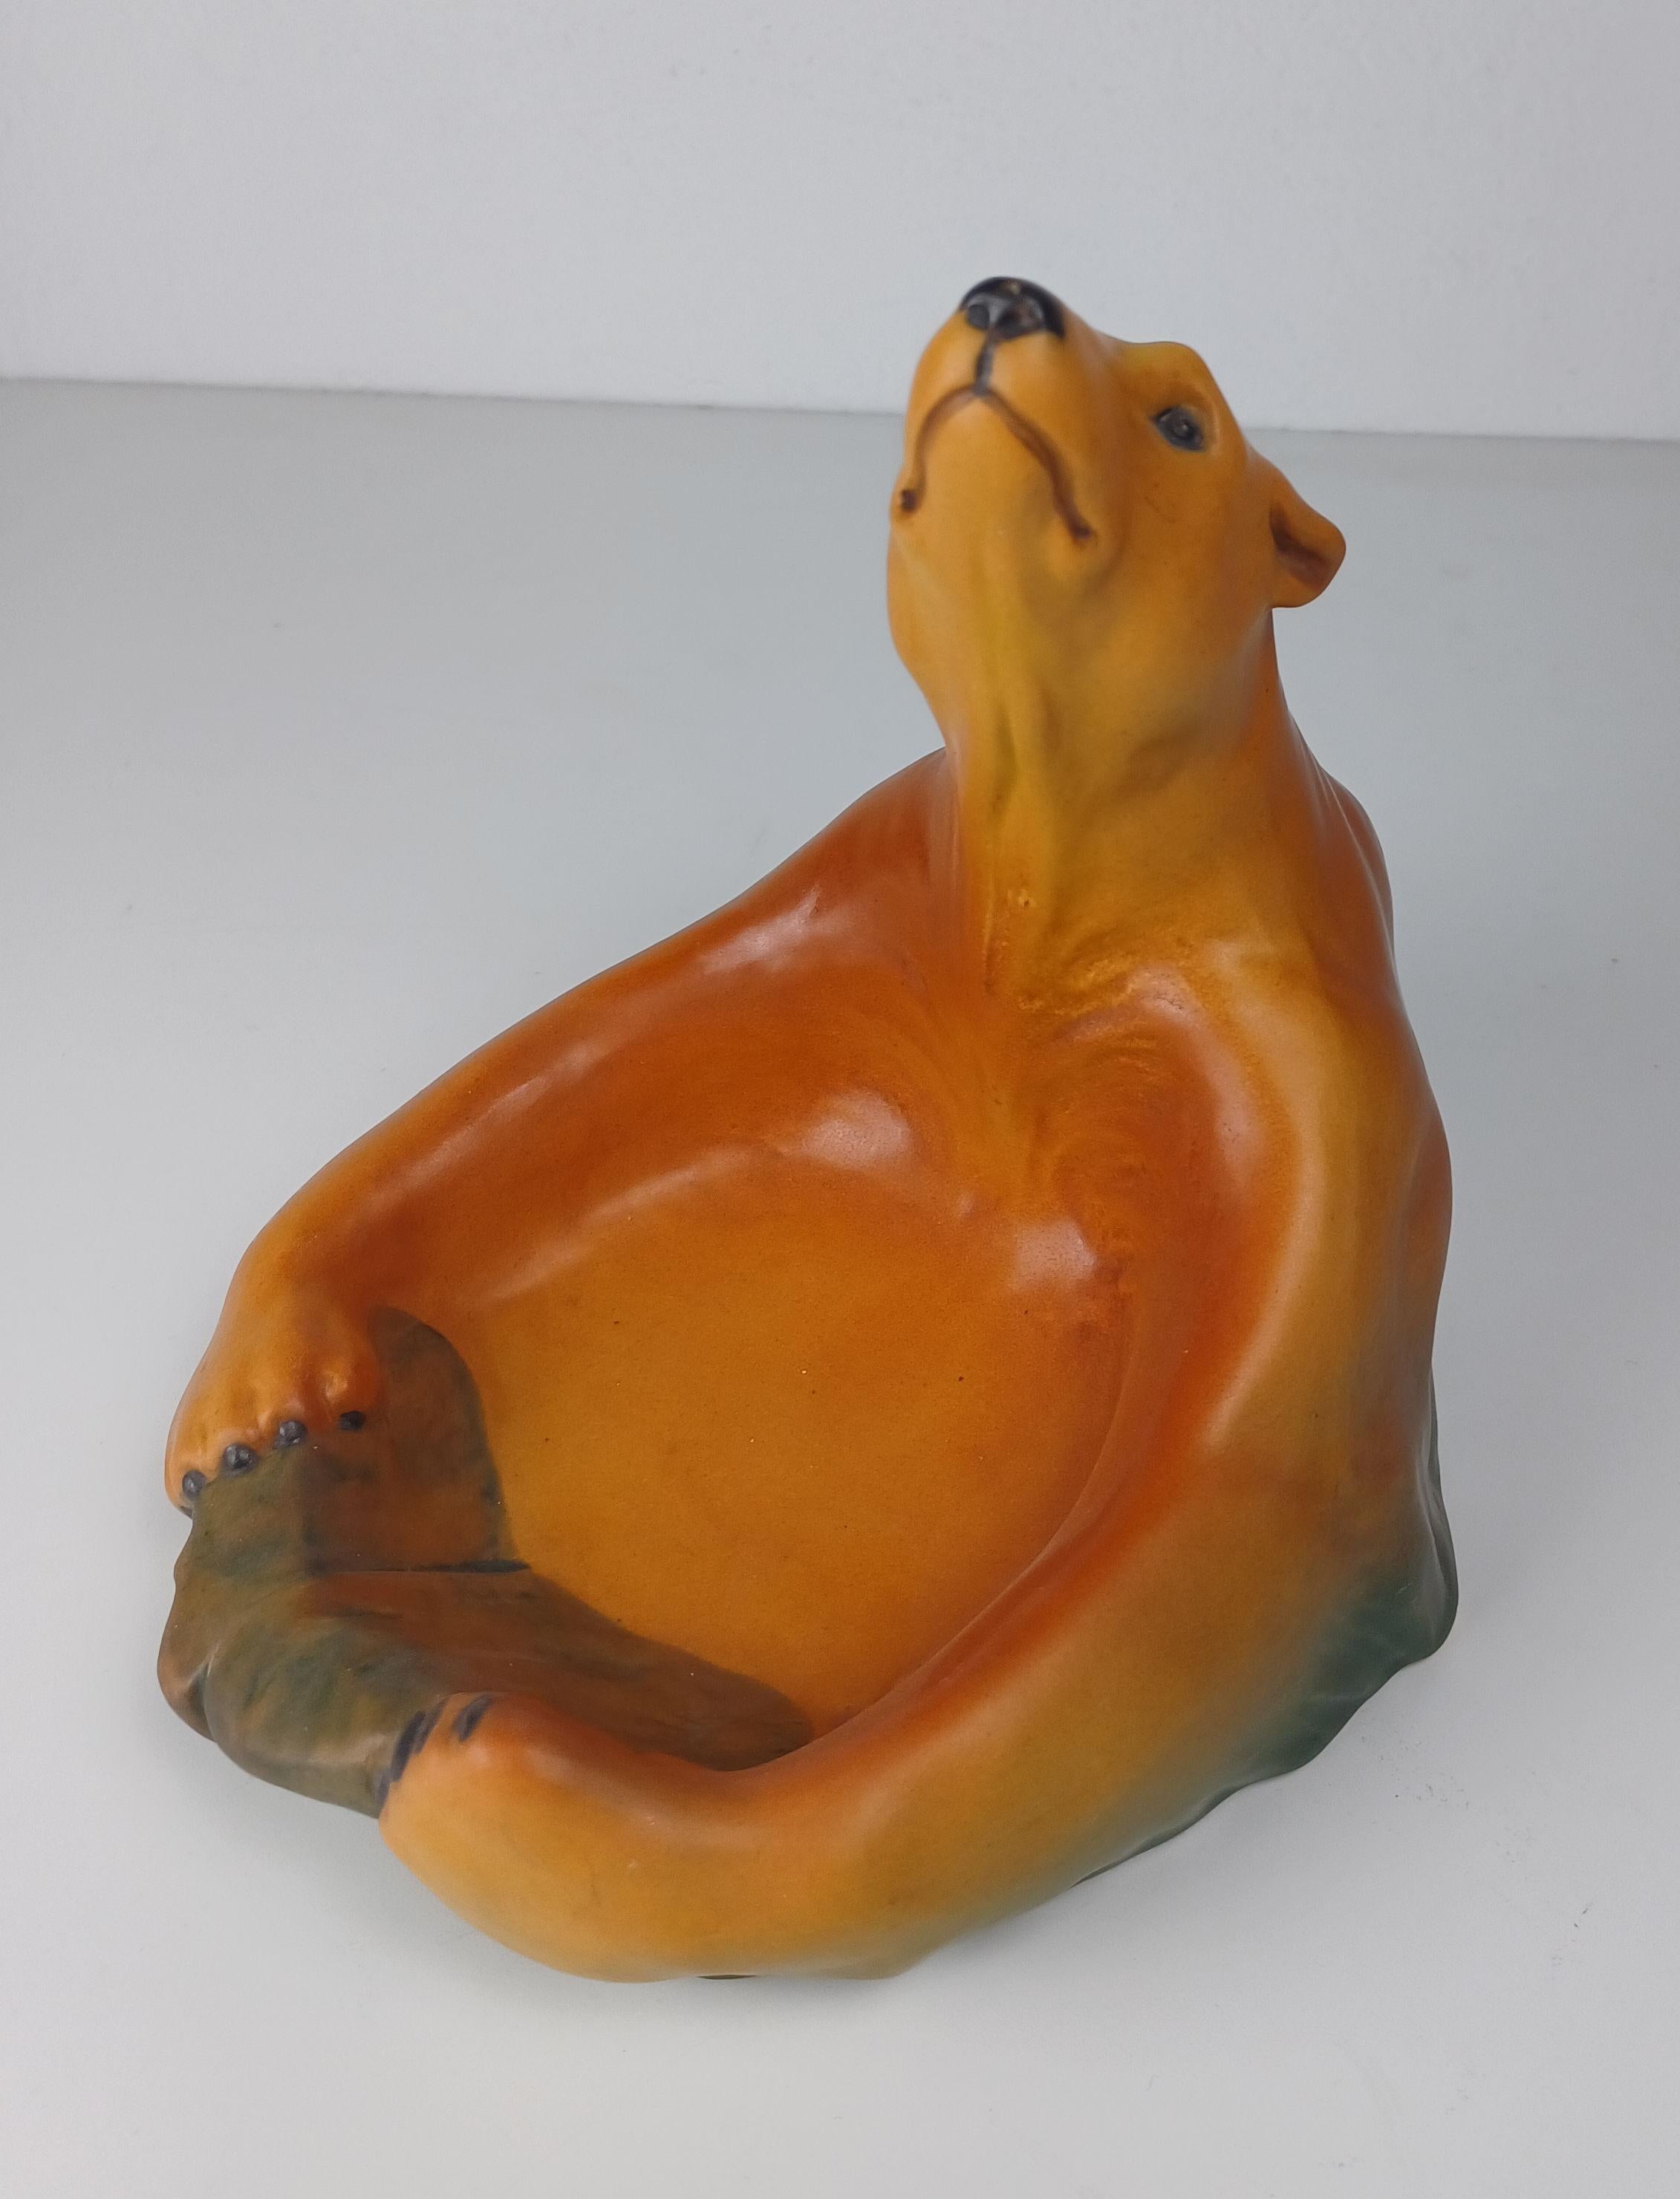 Hand-Crafted 1920's Danish Art Nouveau Handcrafted Icebear Bowl - Ash Tray by P. Ipsens Enke For Sale